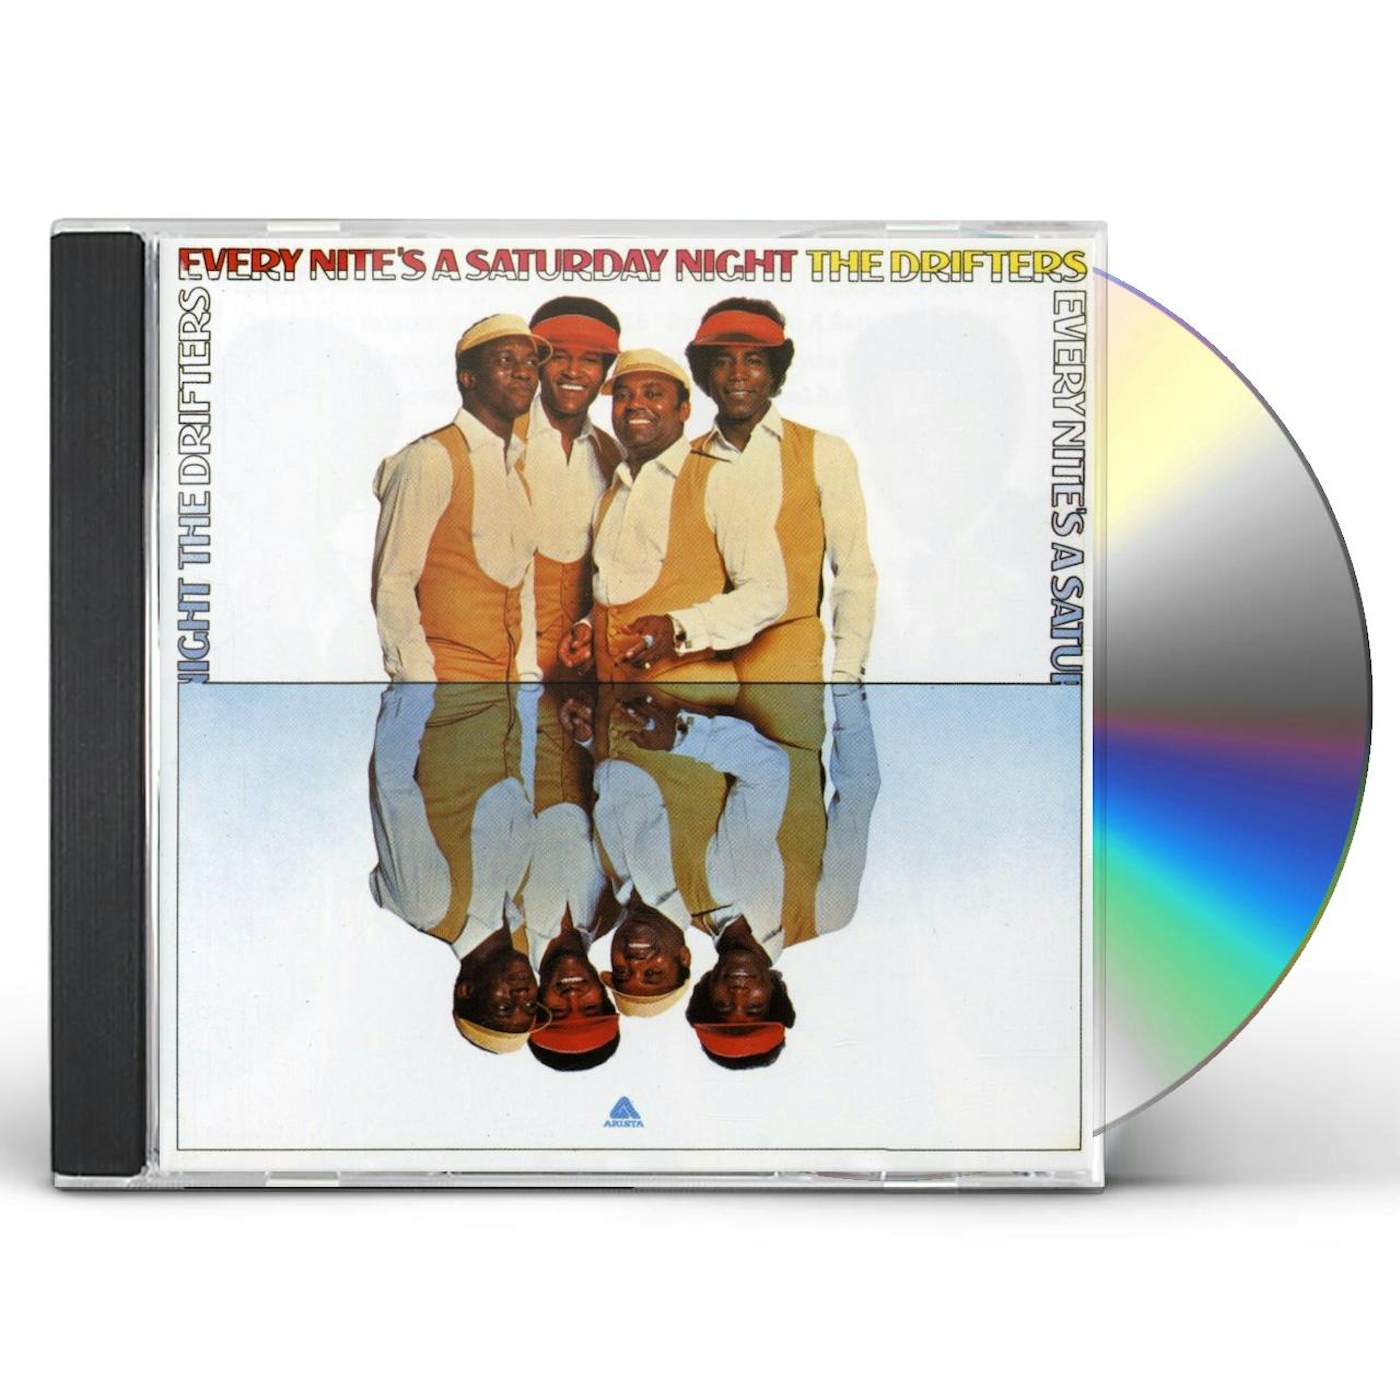 The Drifters EVERY NITE'S A SATURDAY NIGHT CD